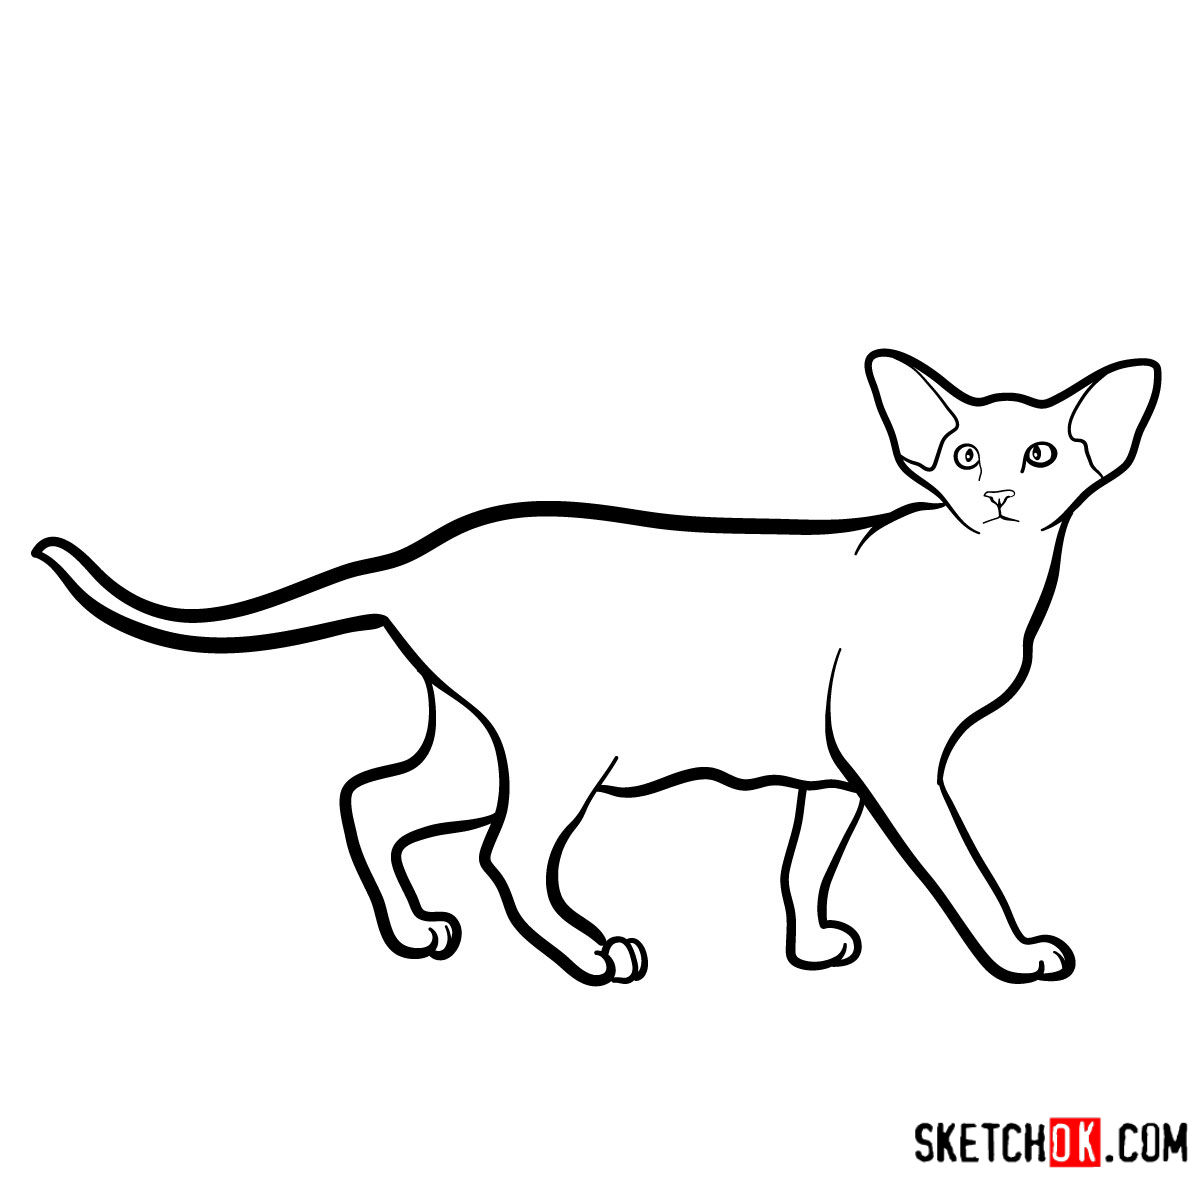 How to draw the Oriental Shorthair cat - step 09